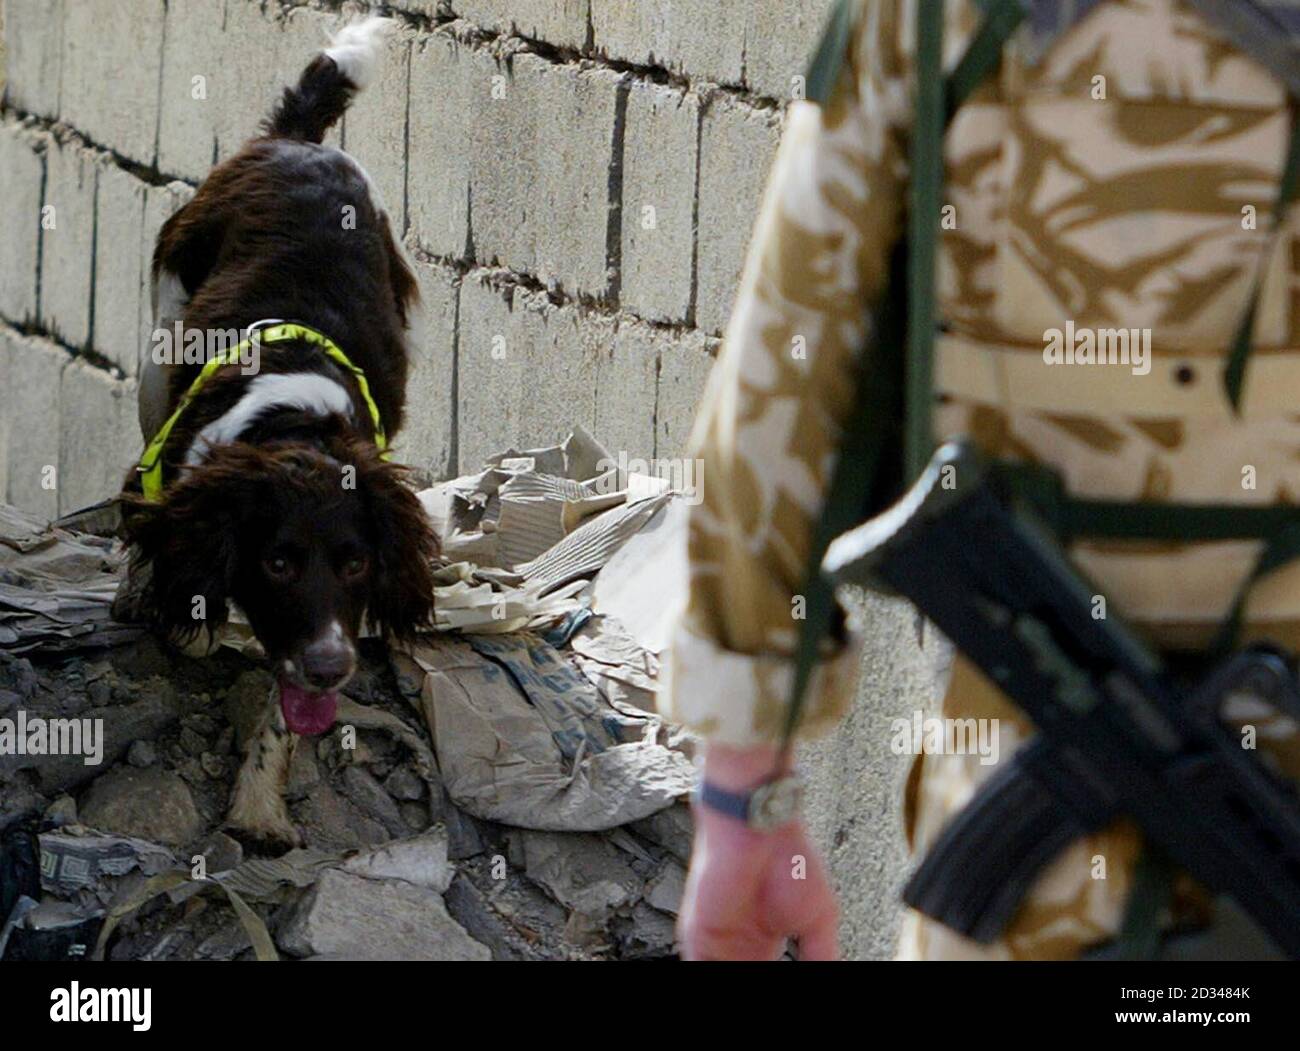 Poppy, a search dog helps the Royal Engineer High Risk Search team search cars in Basra after three Iraqi soldiers were killed in a motorcycle bomb attack in the city earlier. The booby-trapped vehicle exploded close to the Old State Buildings, in the Al-Hussein district, shortly before 8am local time, as troops carried out patrols. British quick-response teams have been sent to the scene and bomb disposal experts are arriving to examine the device. Stock Photo